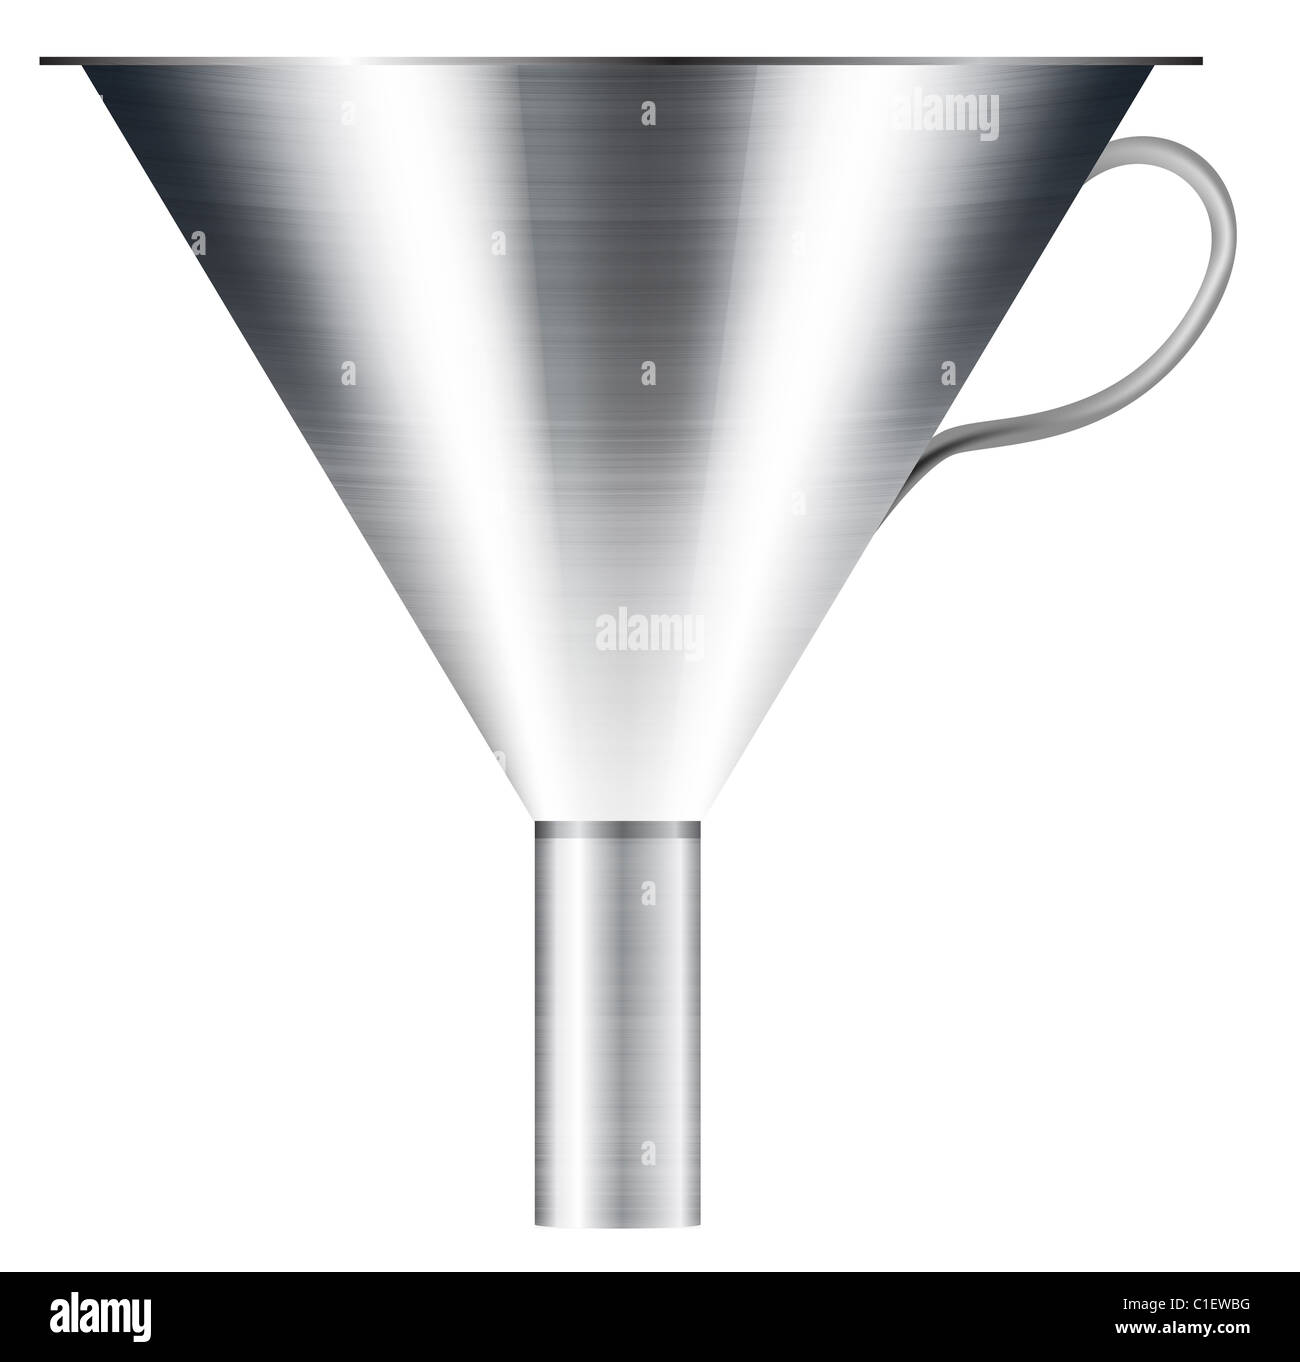 funnel made of stainless steel Stock Photo